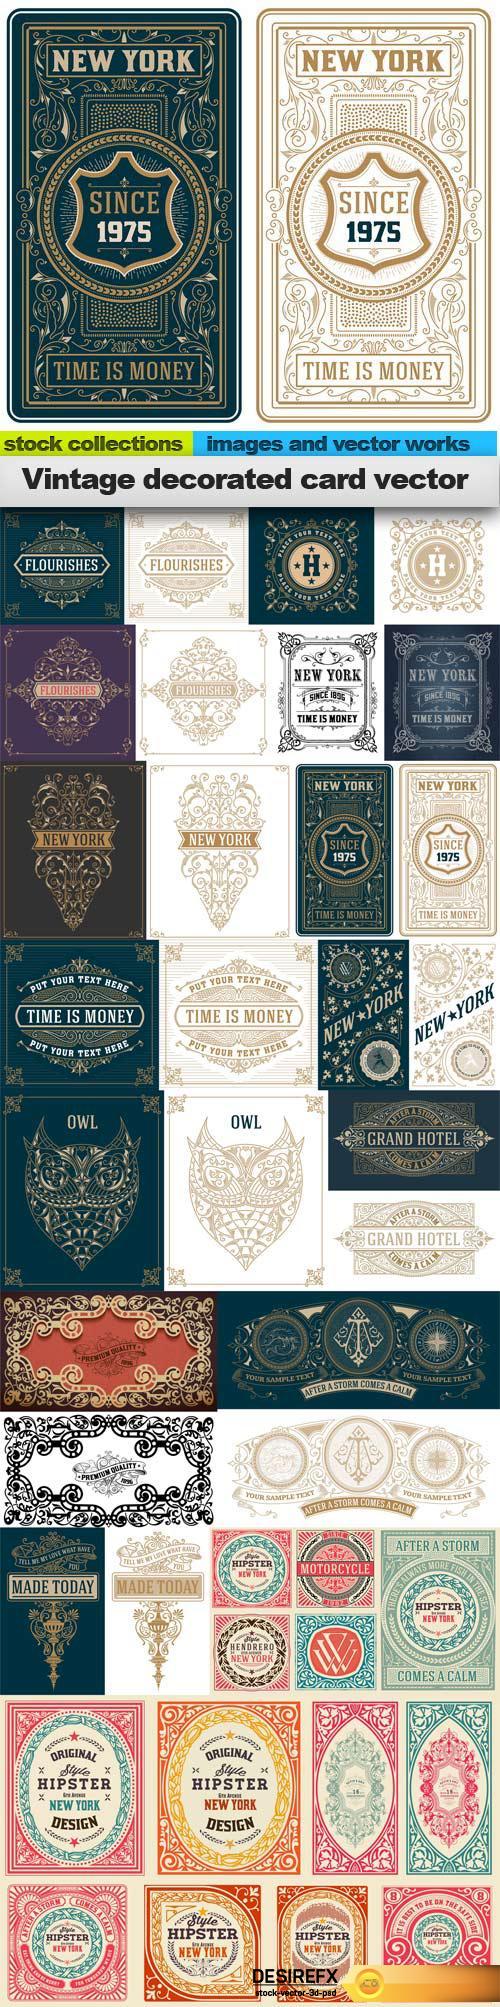 Vintage decorated card vector, 15 x EPS